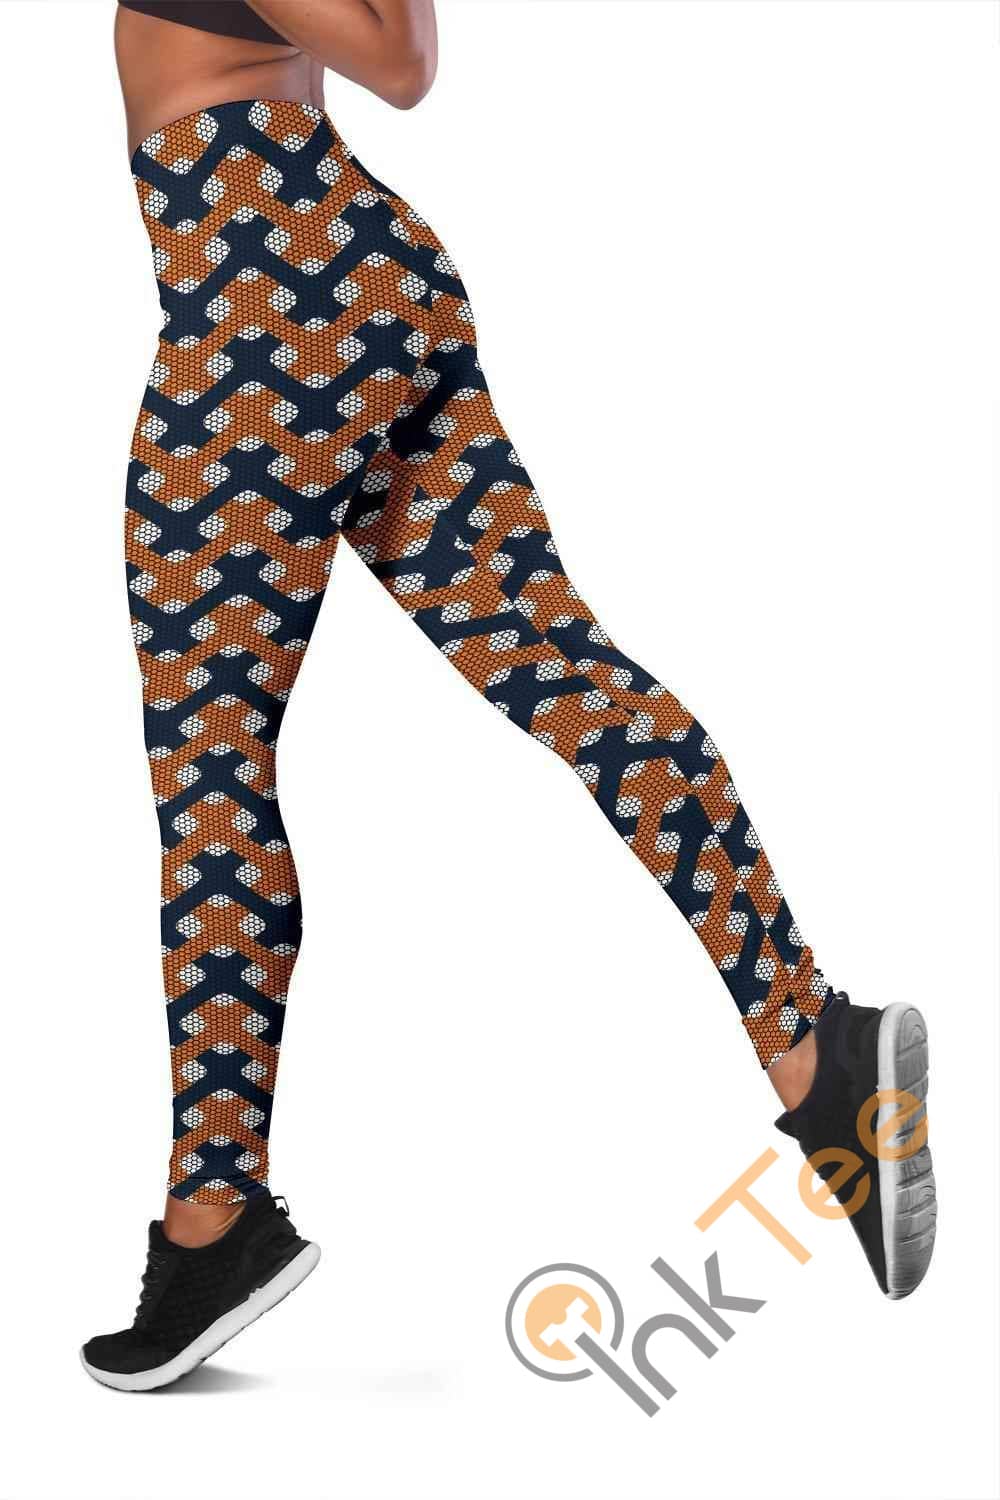 Inktee Store - Auburn Tigers Inspired 3D All Over Print For Yoga Fitness Fashion Women'S Leggings Image